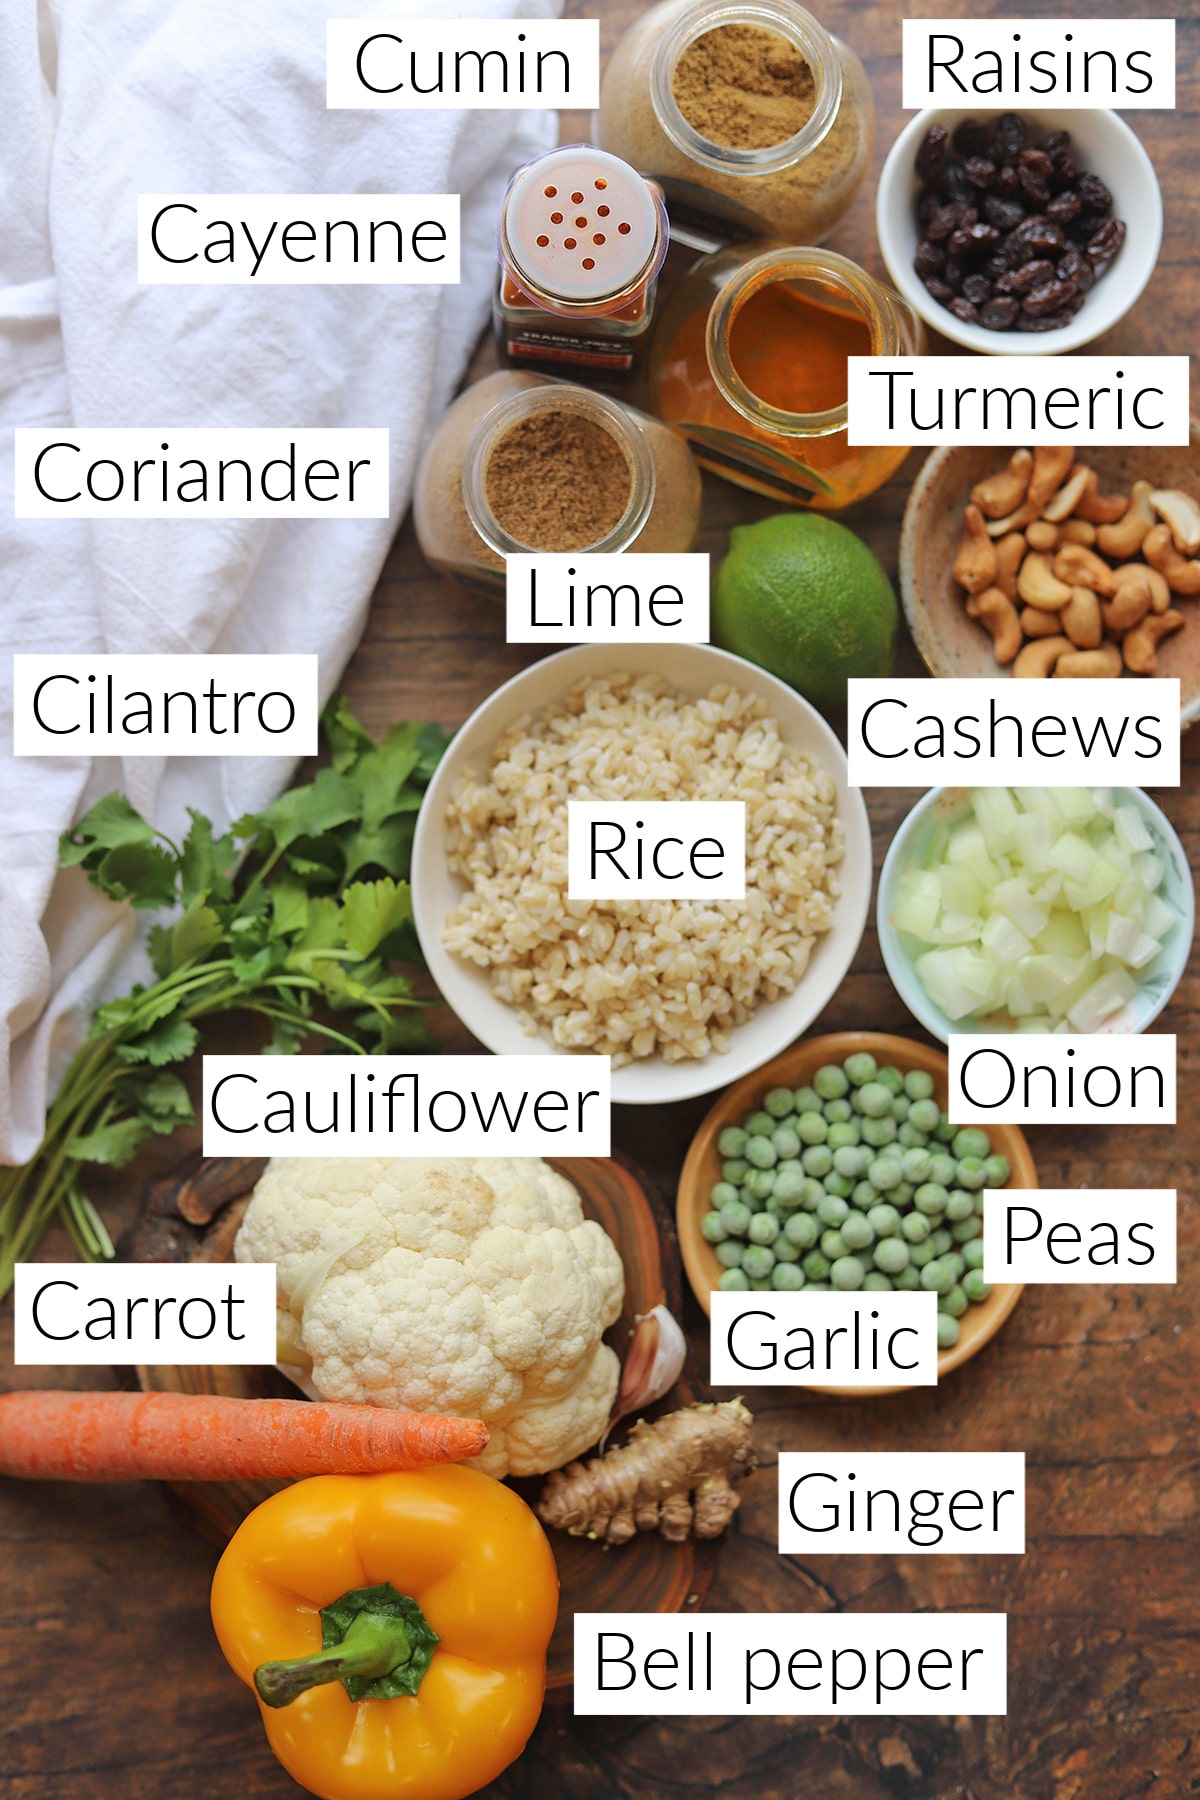 Labeled ingredients for turmeric ginger rice.